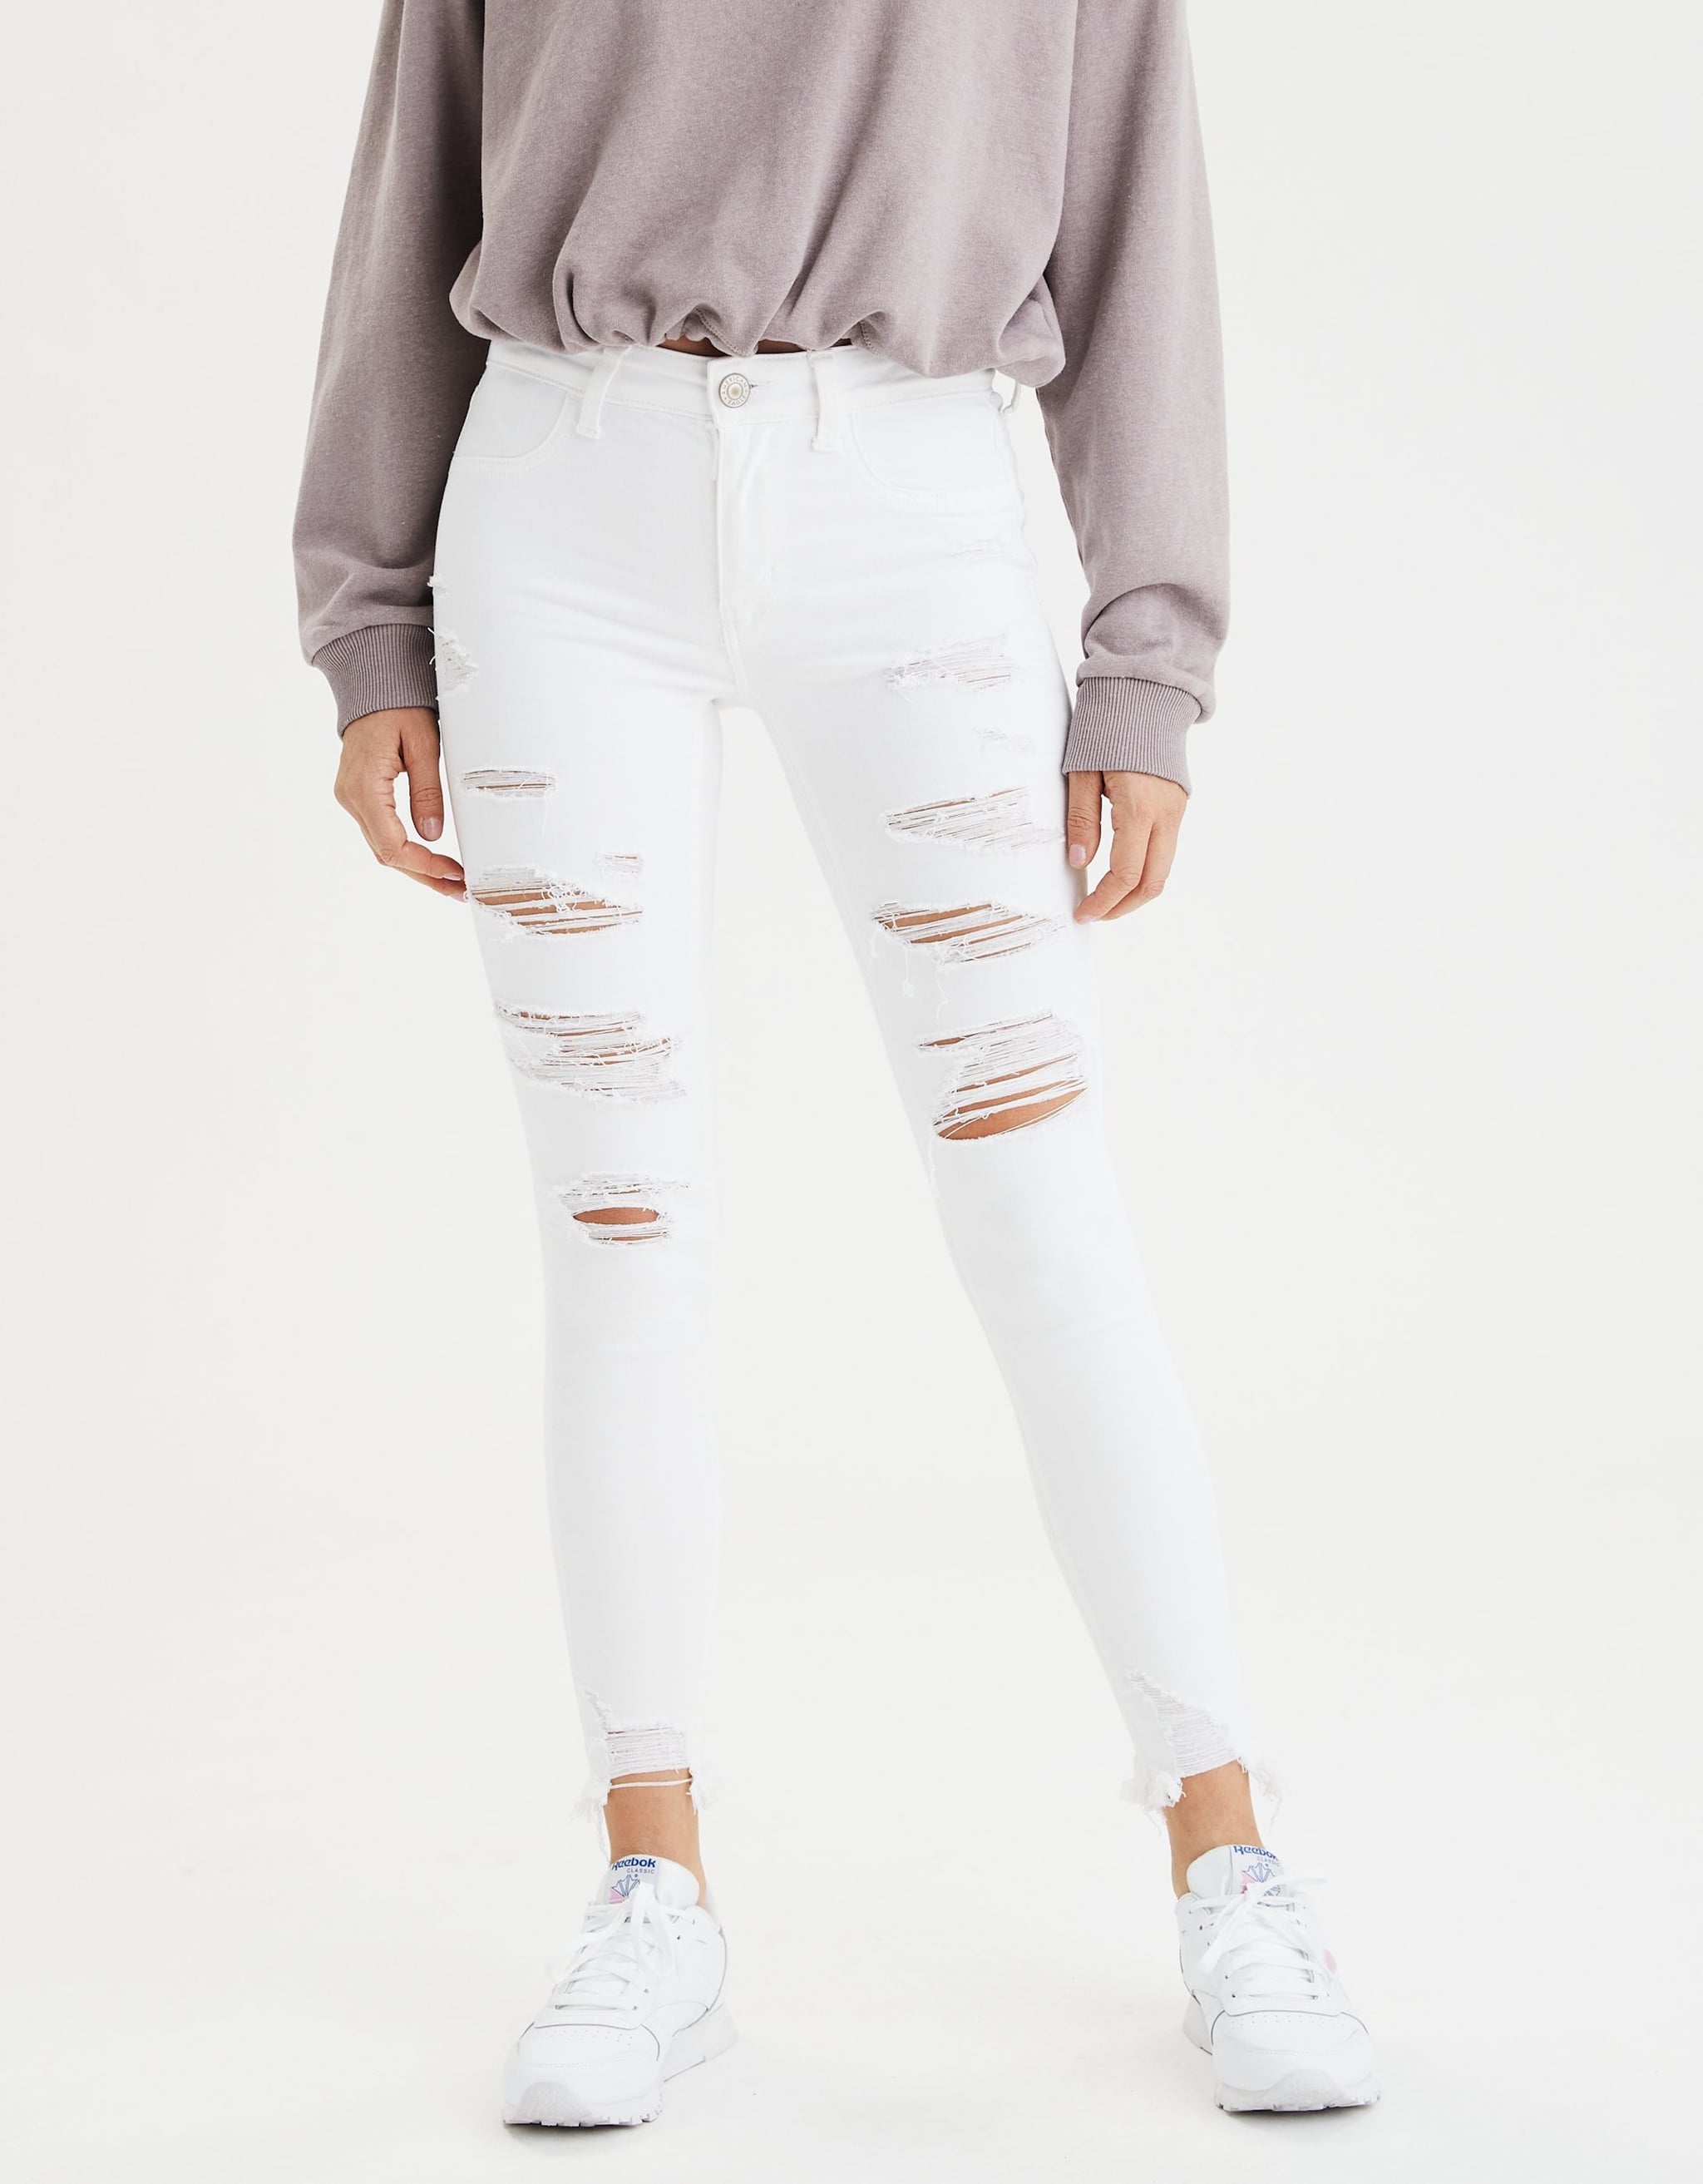 Buy Womens White Ripped Jeans In Stock 5744